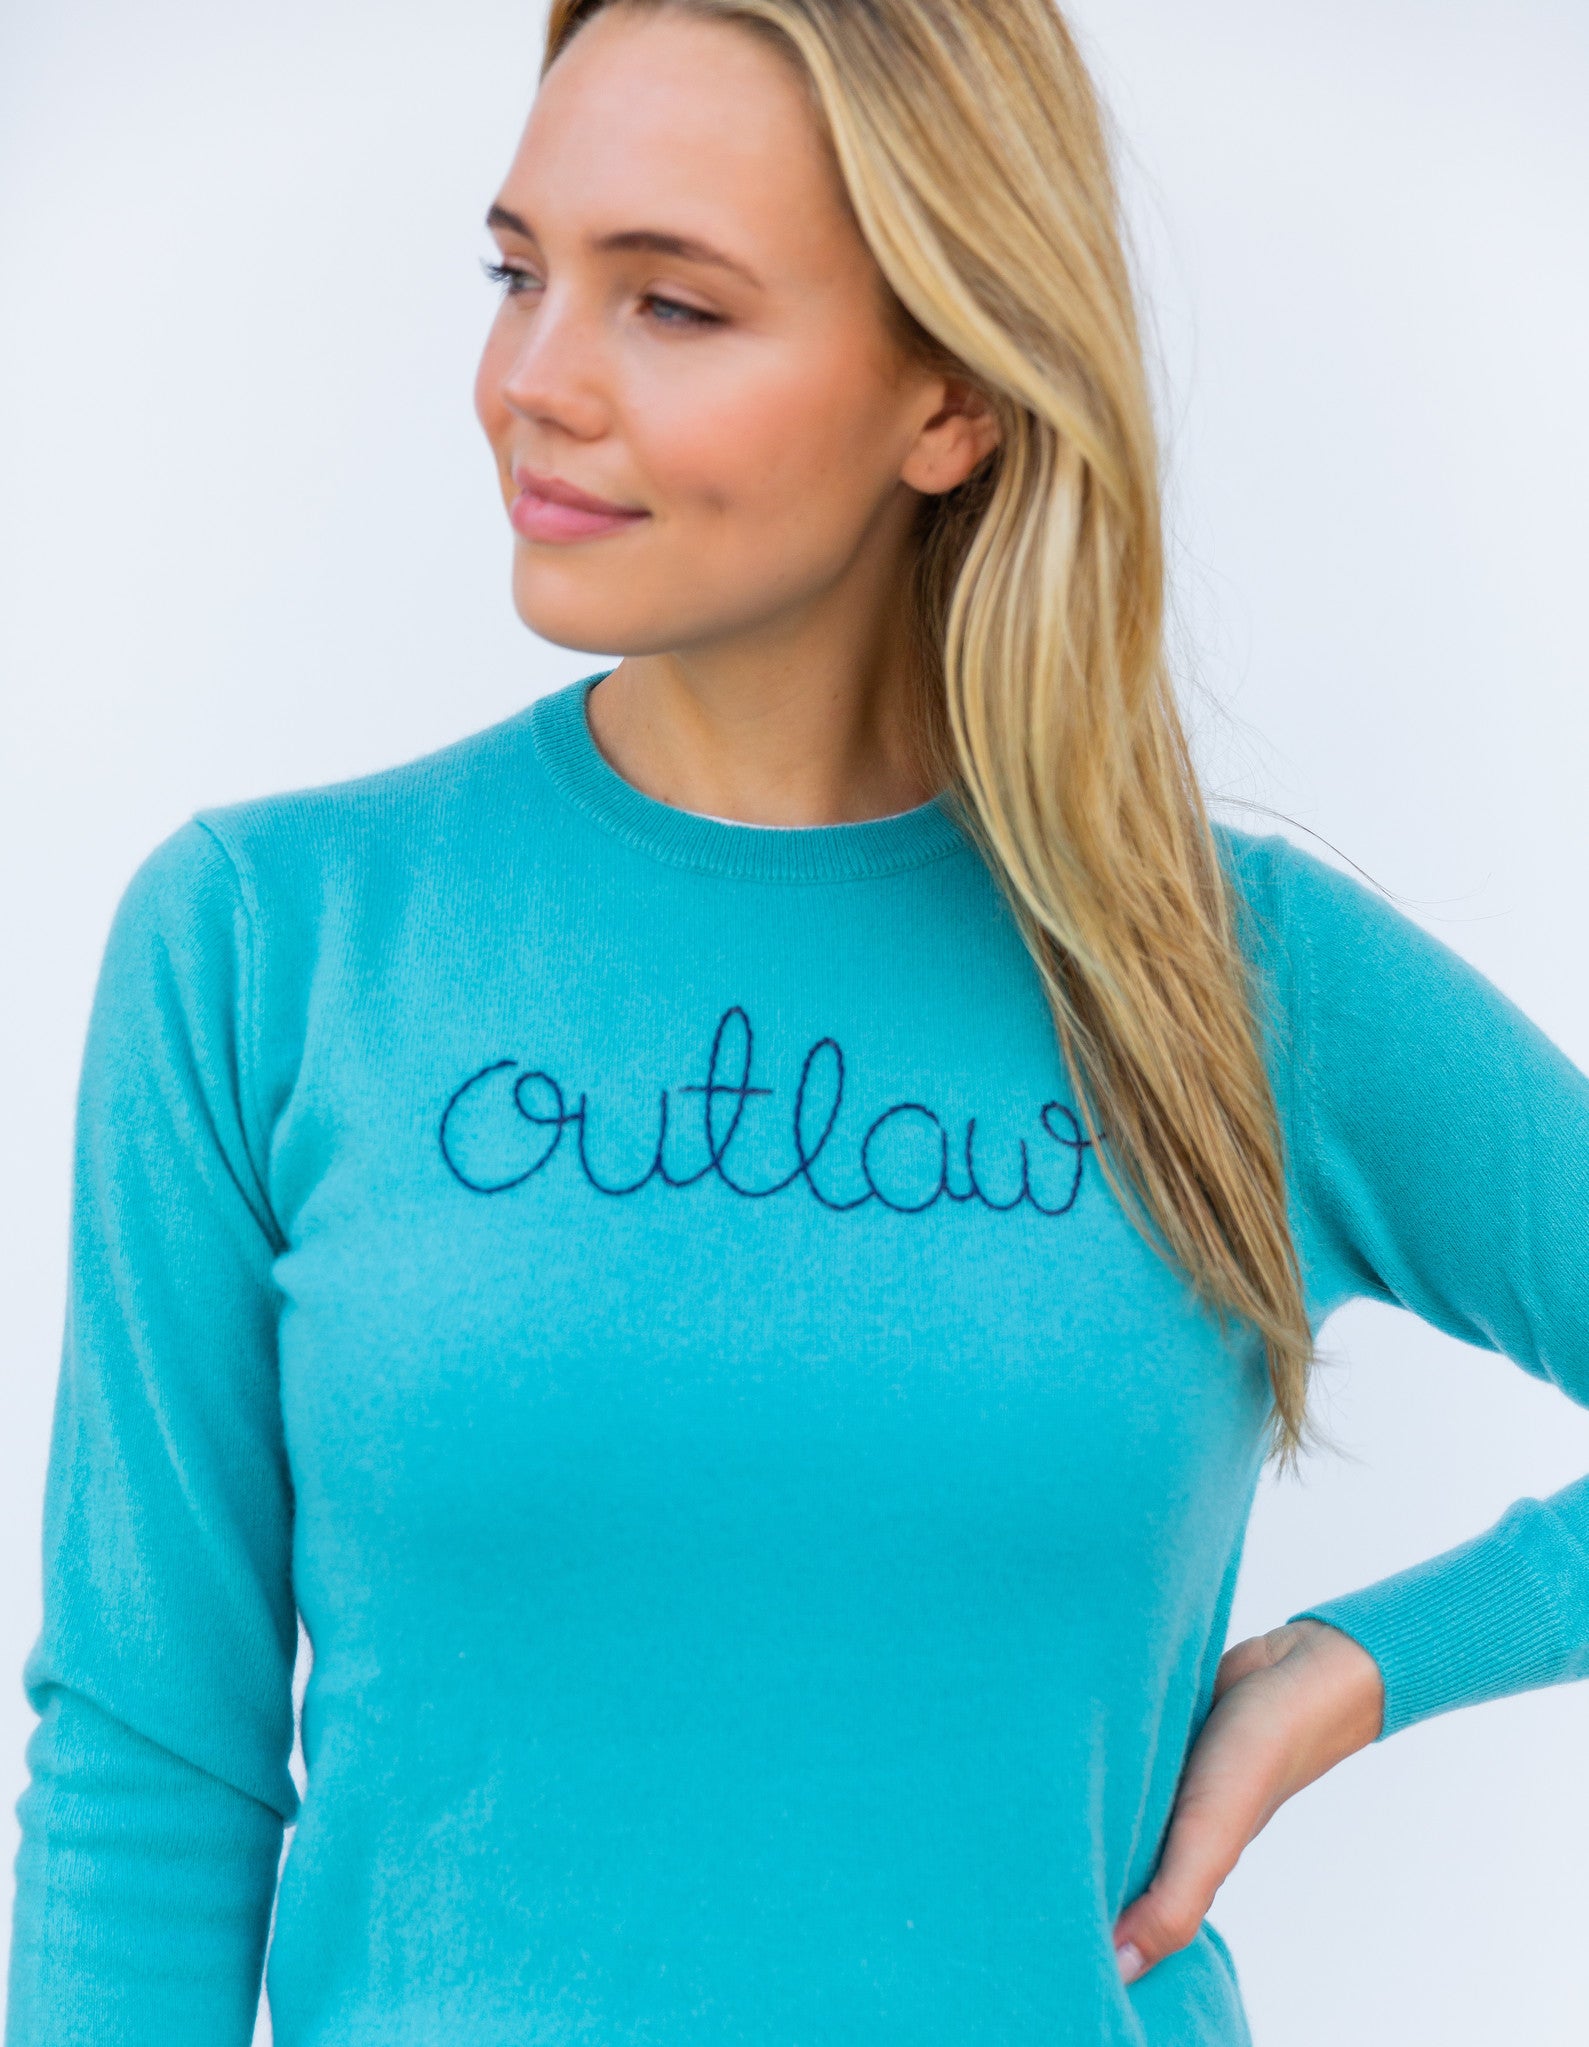 Outlaw L/S - Teal